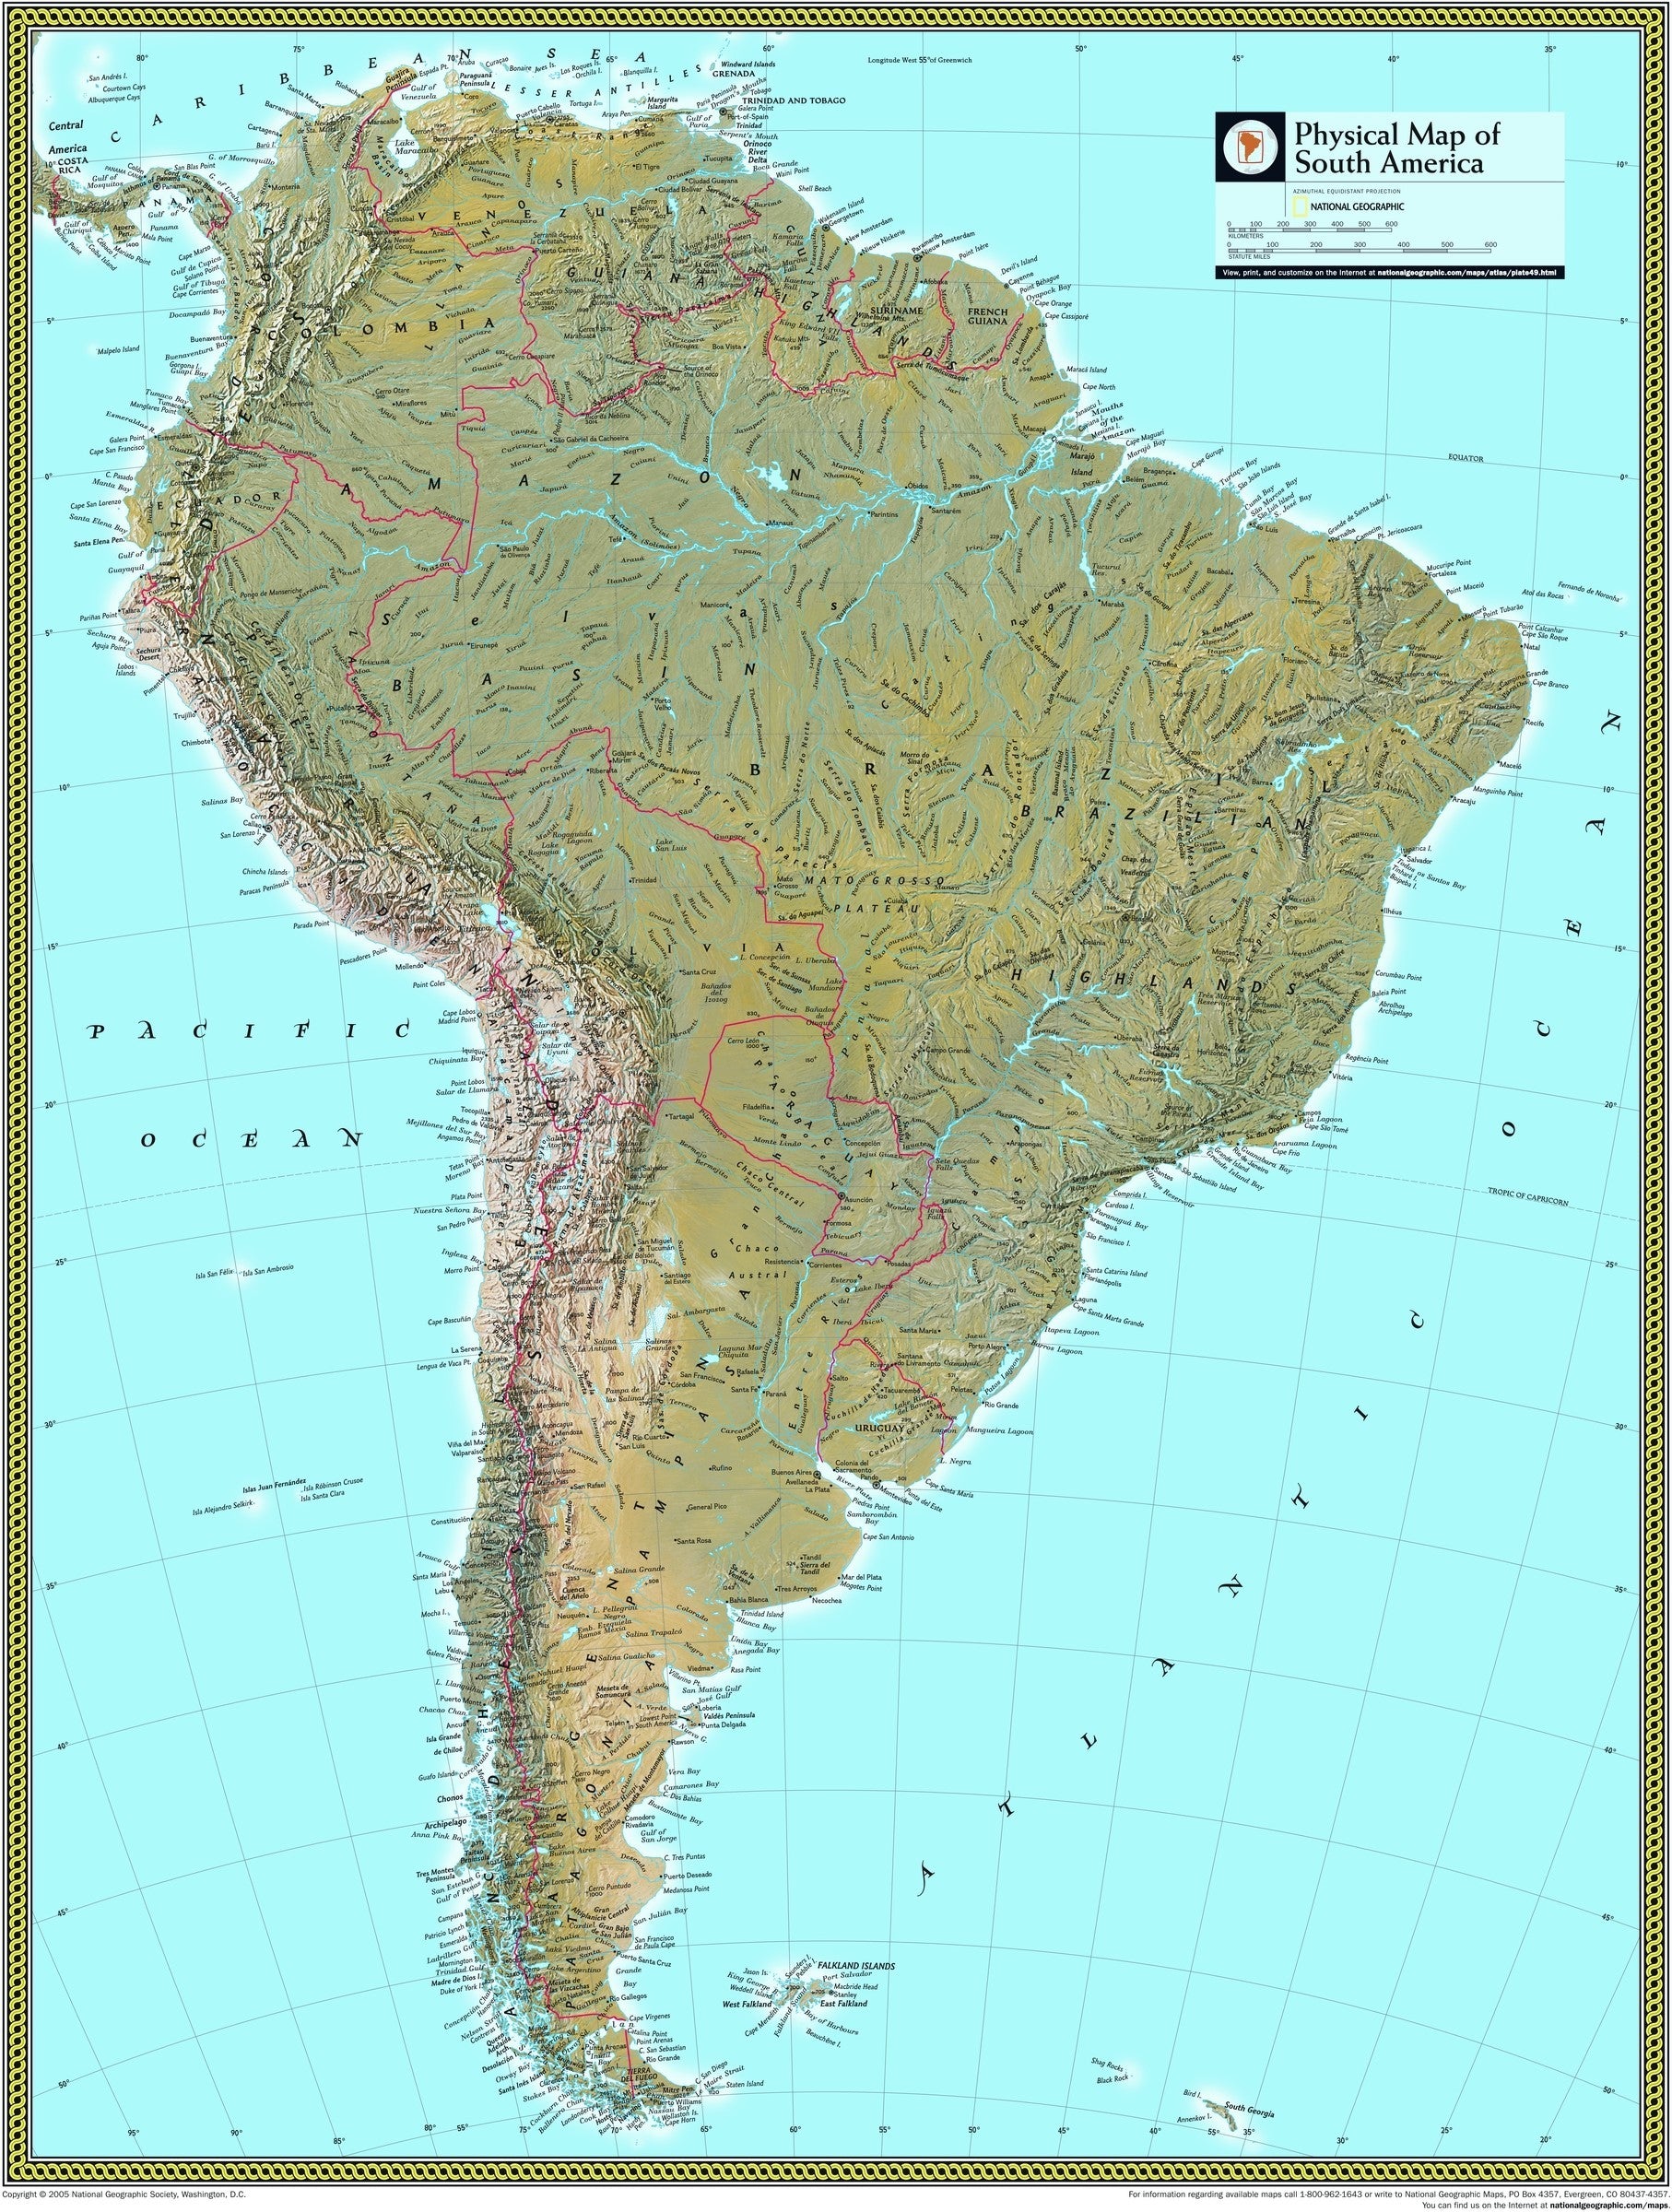 This Physical Wall Map Of South America By National Geographic Depicts The Drama Of The Andes As They Span The Entire Continent And How The Amazon And All Its Tributaries Snake Through